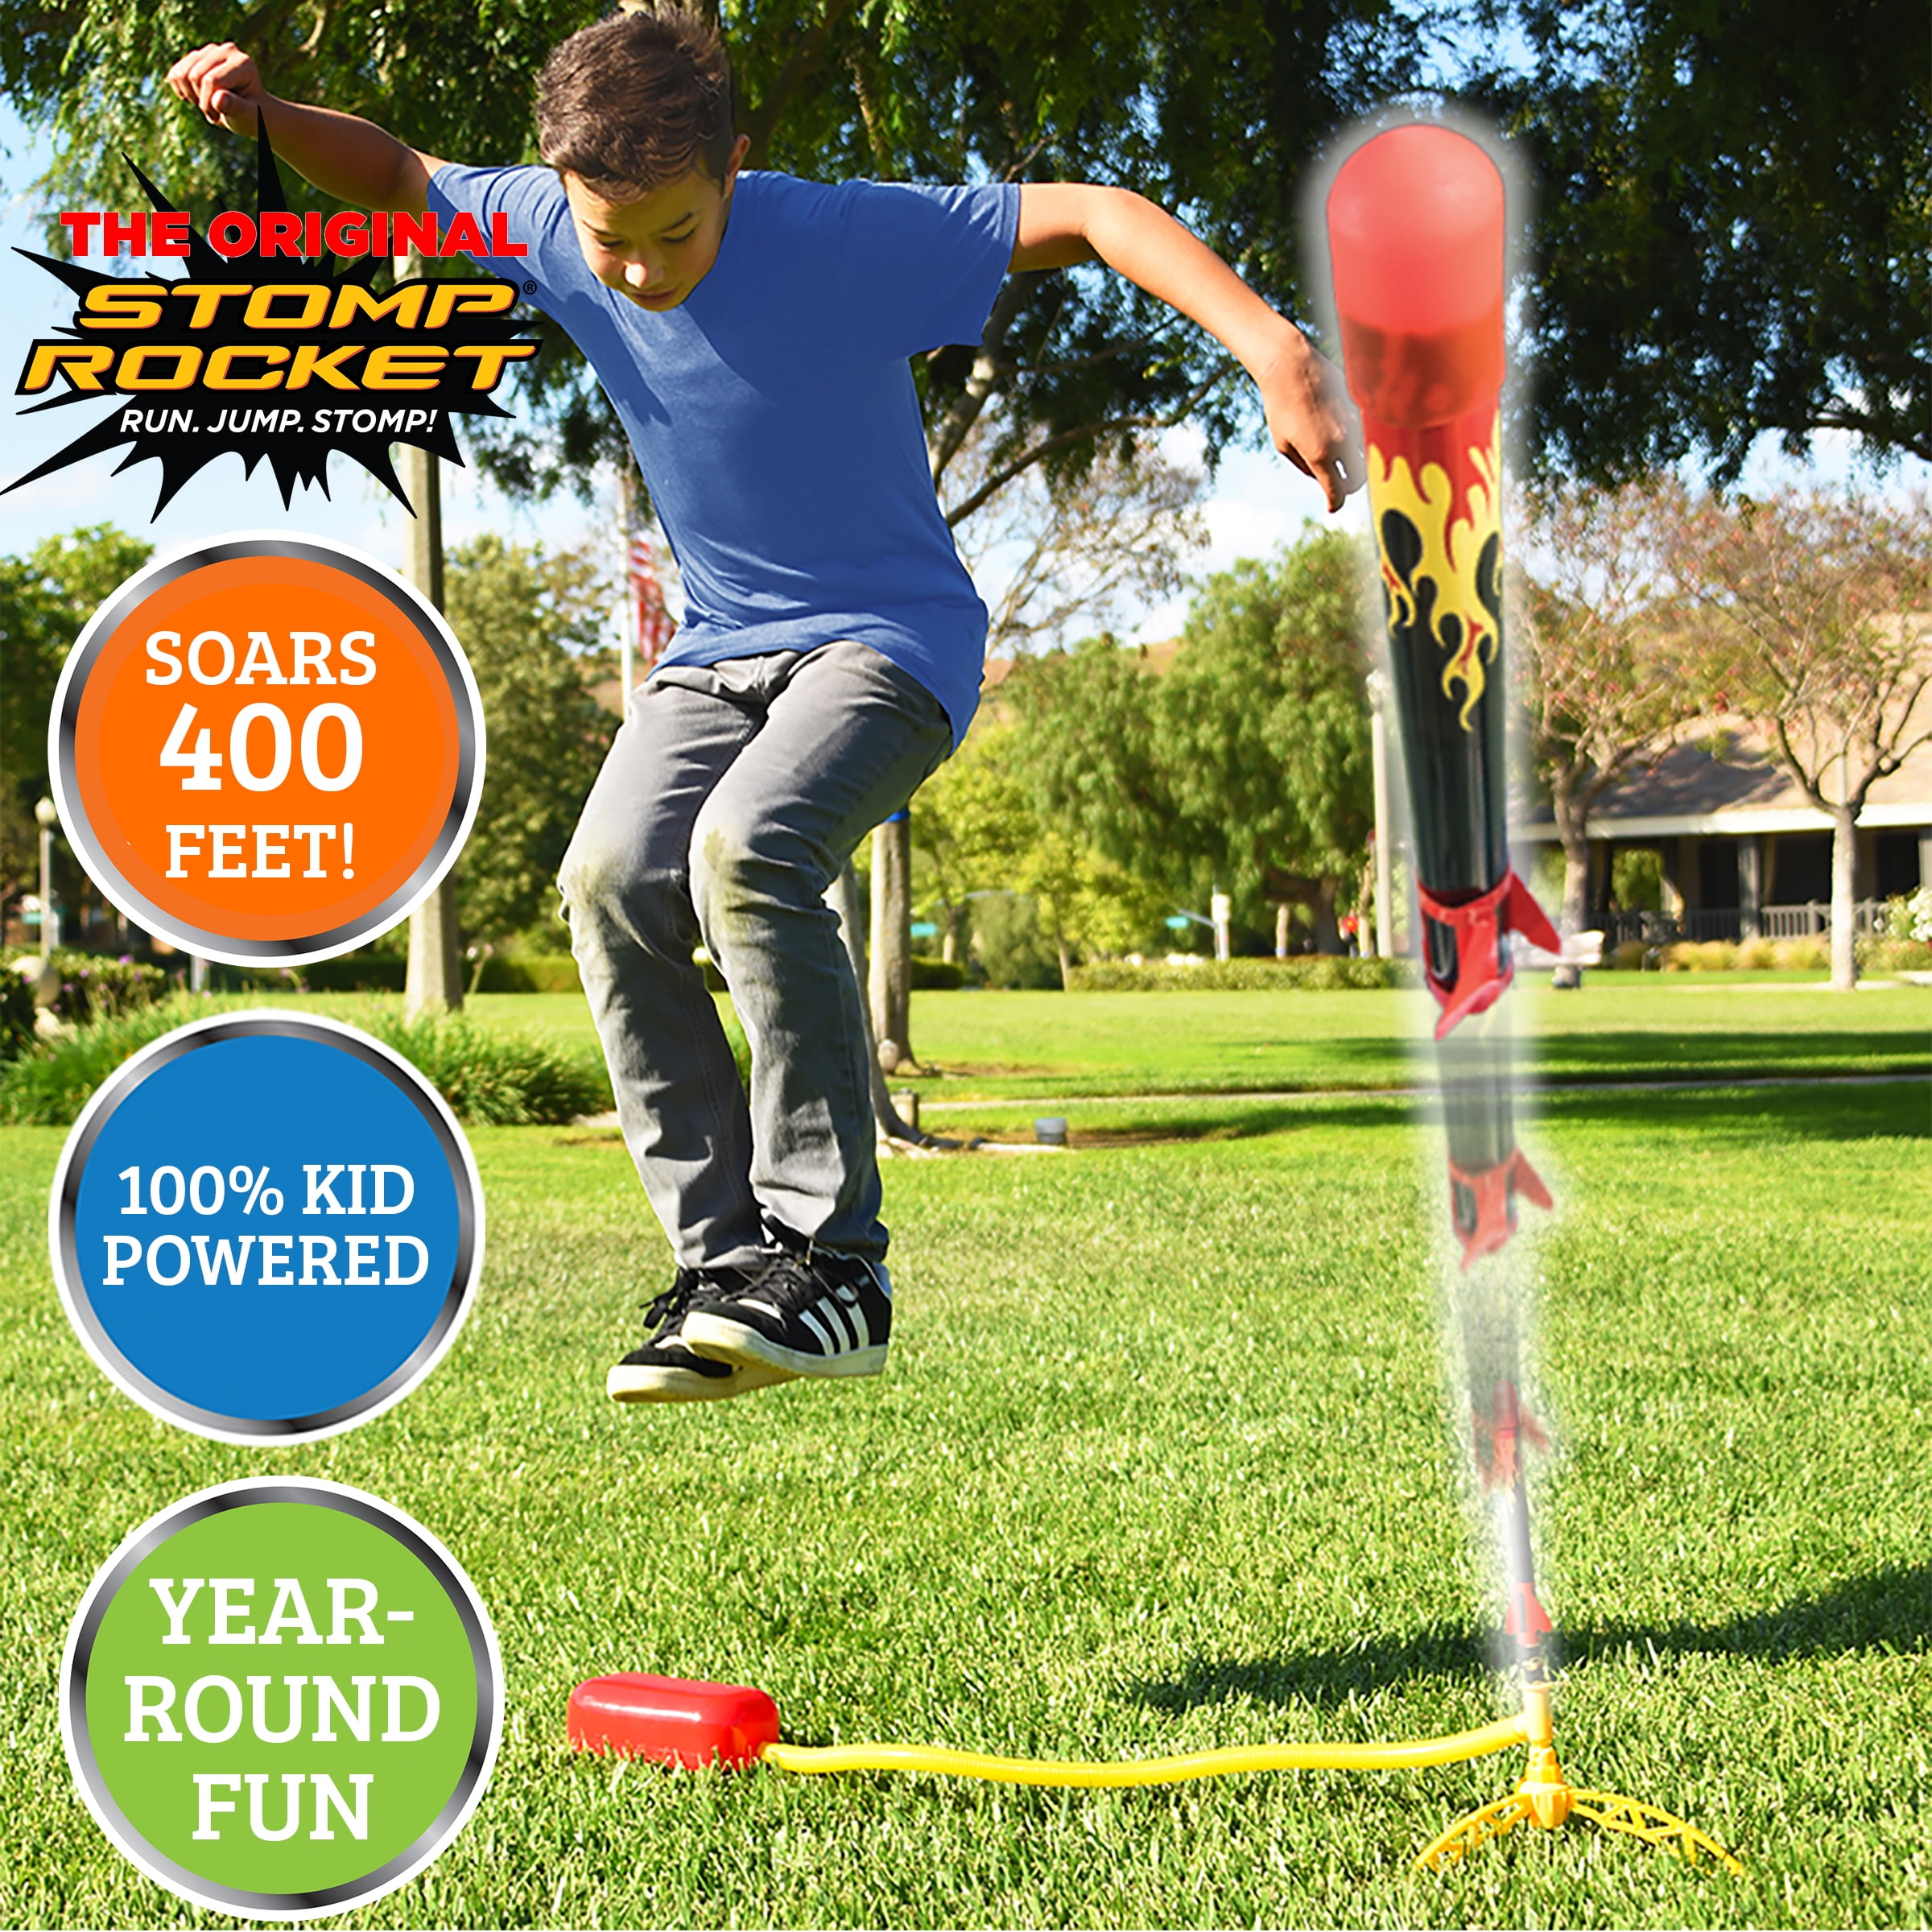 Ages 9 Years Up Comes with Toy Rocket Launcher Stomp Rocket Extreme Rocket 6 Rockets Outdoor Rocket Toy Gift for Boys and Girls 